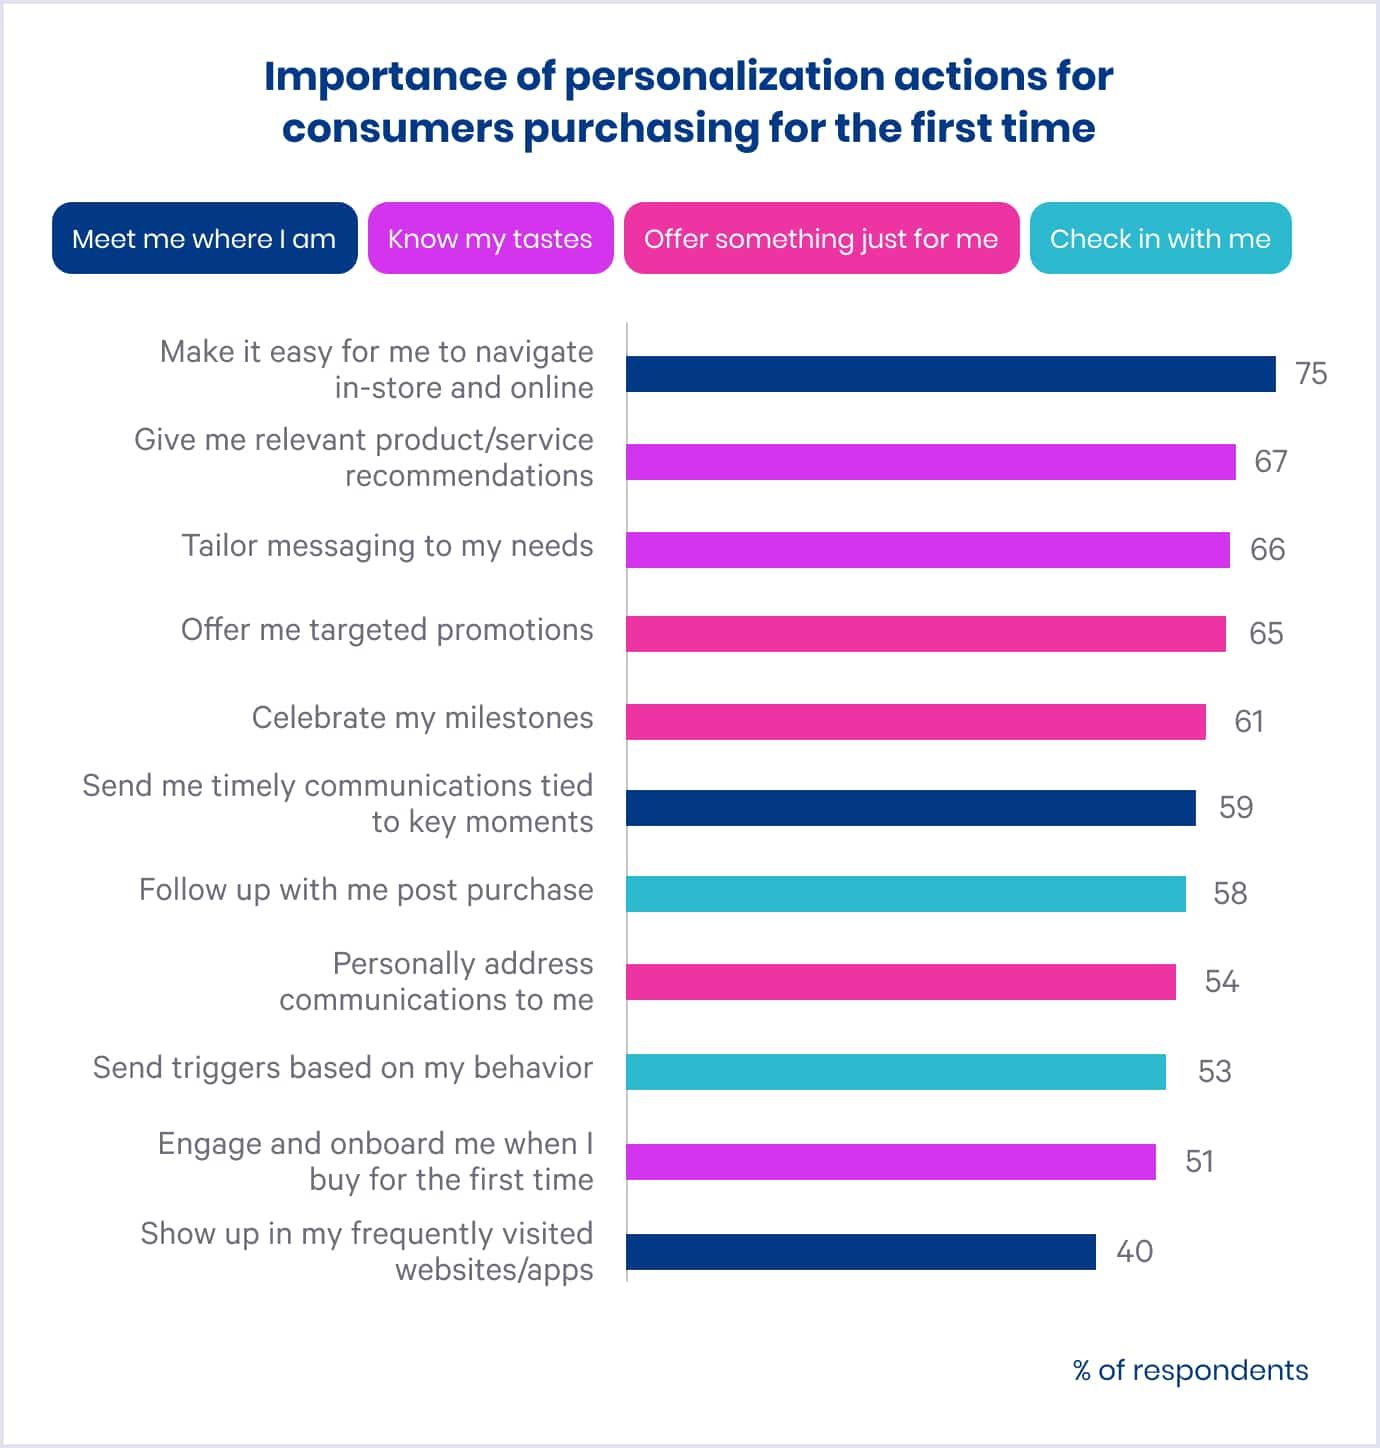 Importance of personalization in among B2B ecommerce trends